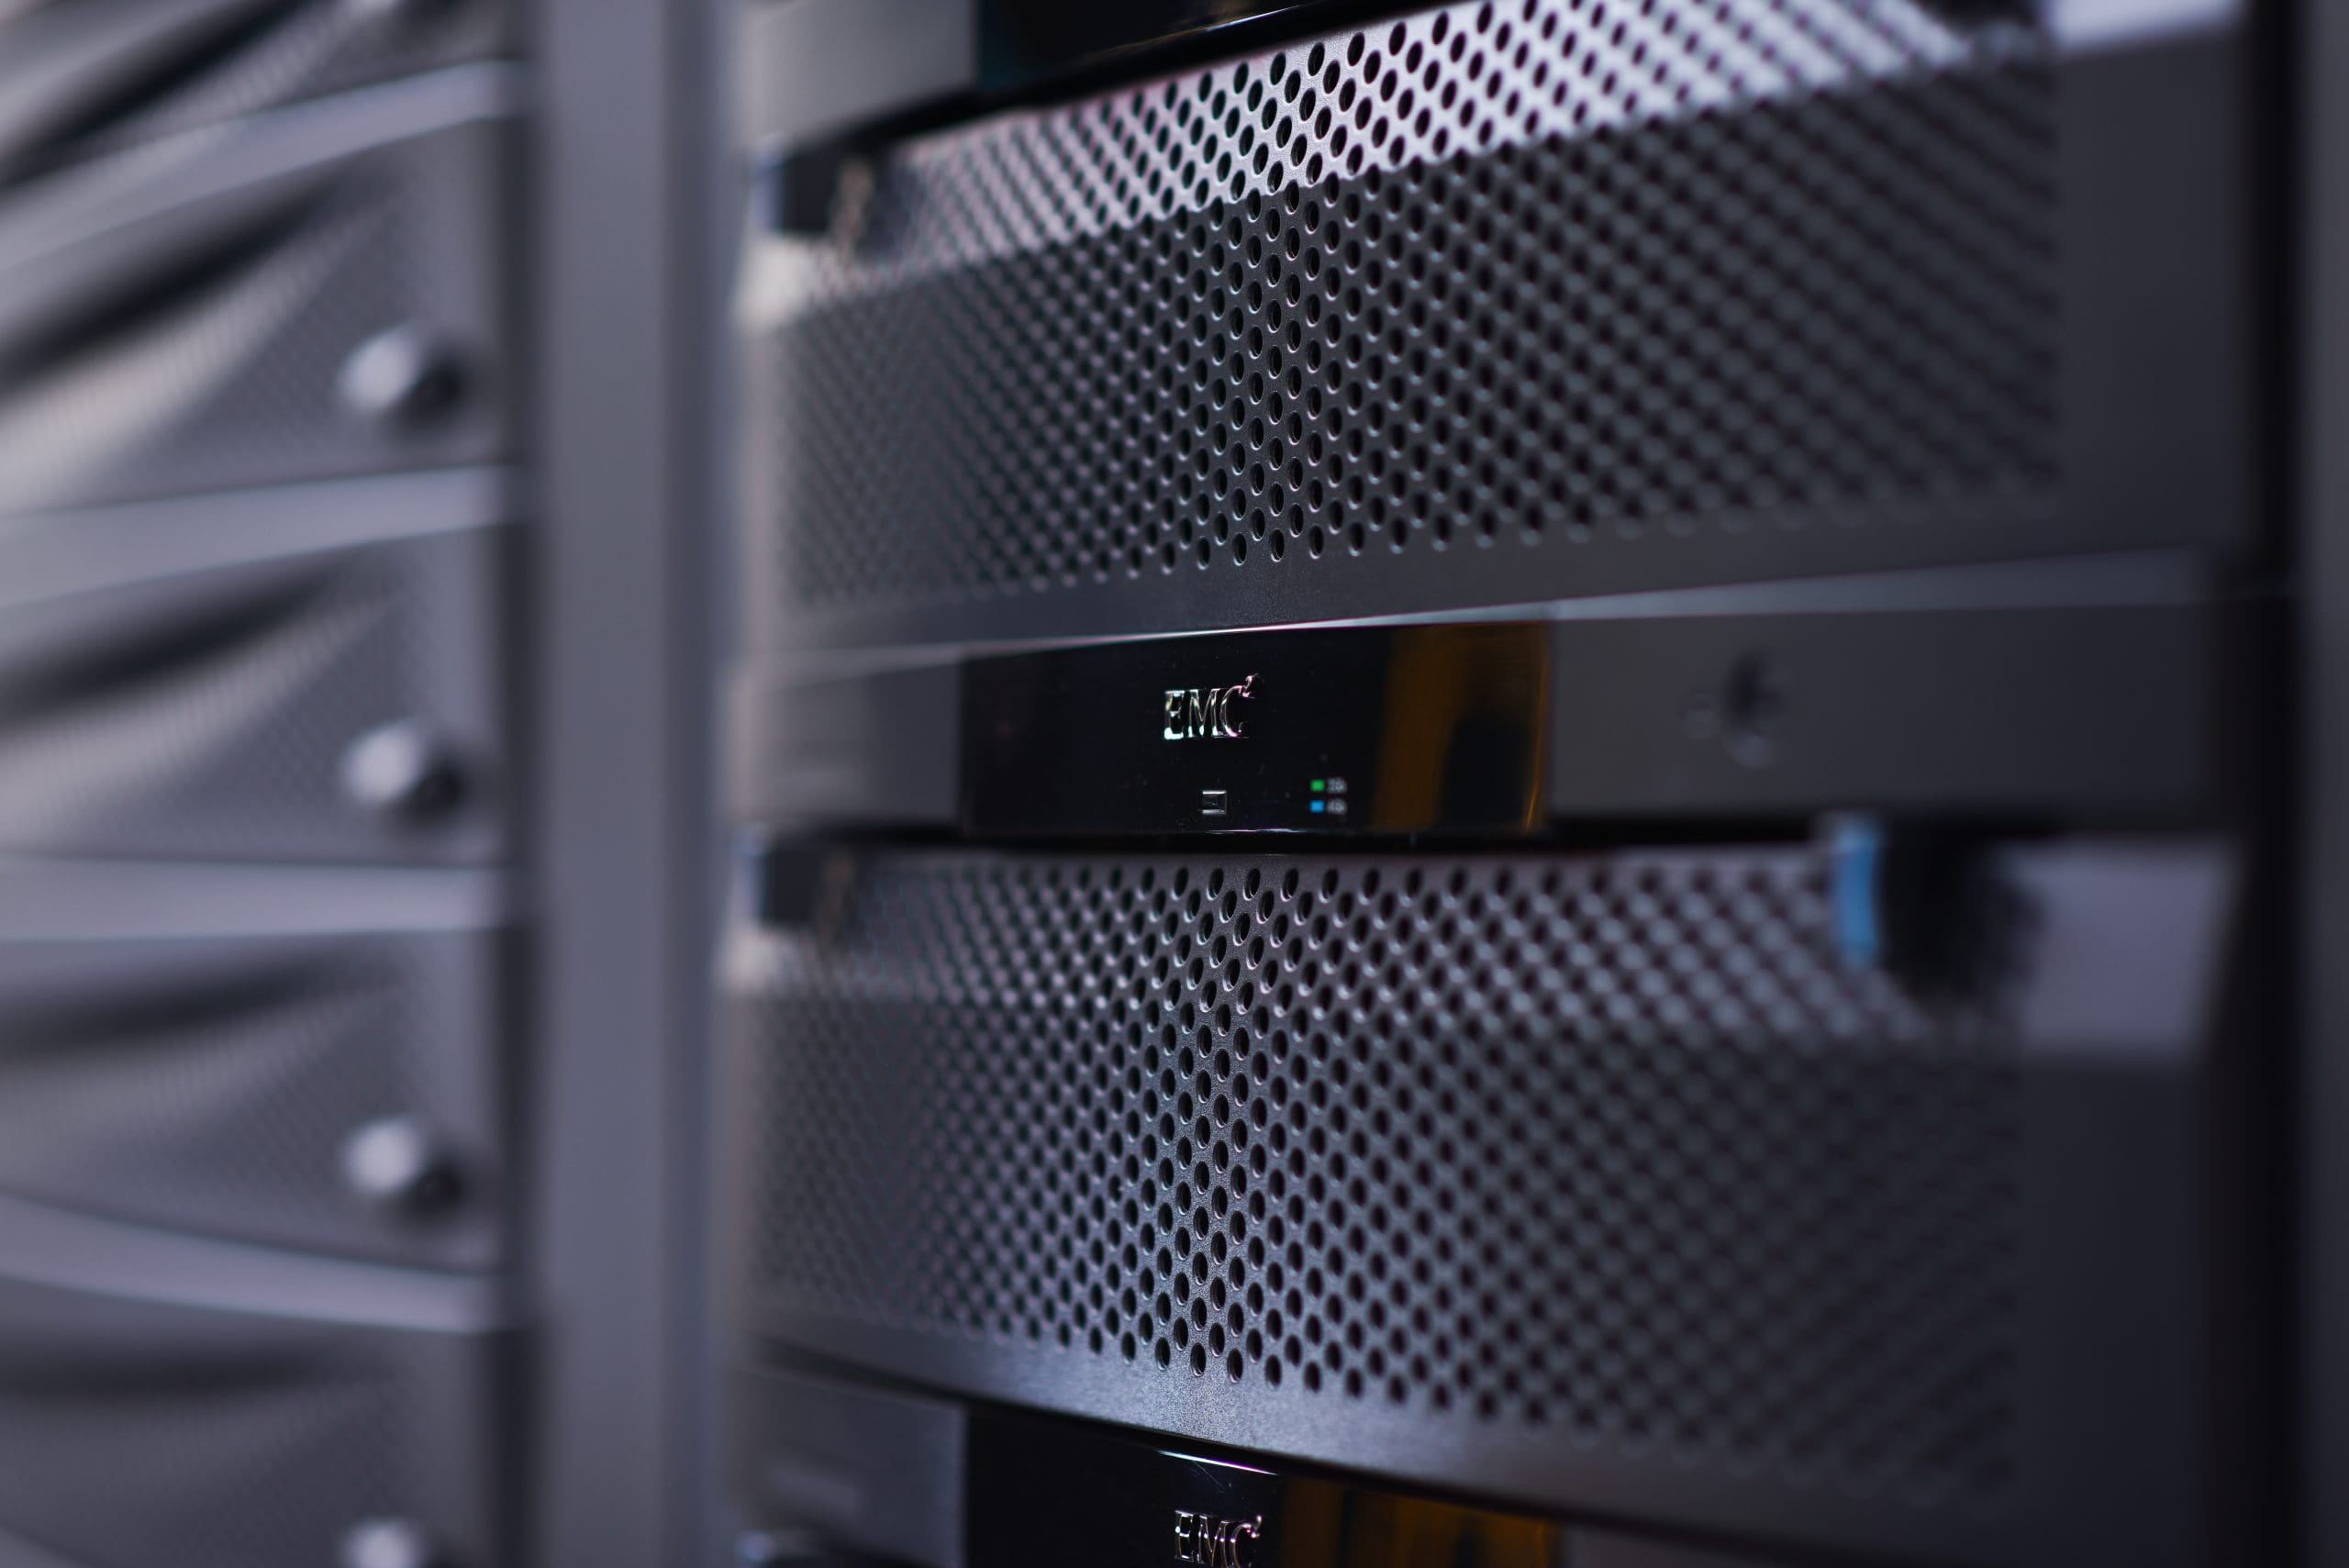 Photograph of servers in a rack, inside of a data centre